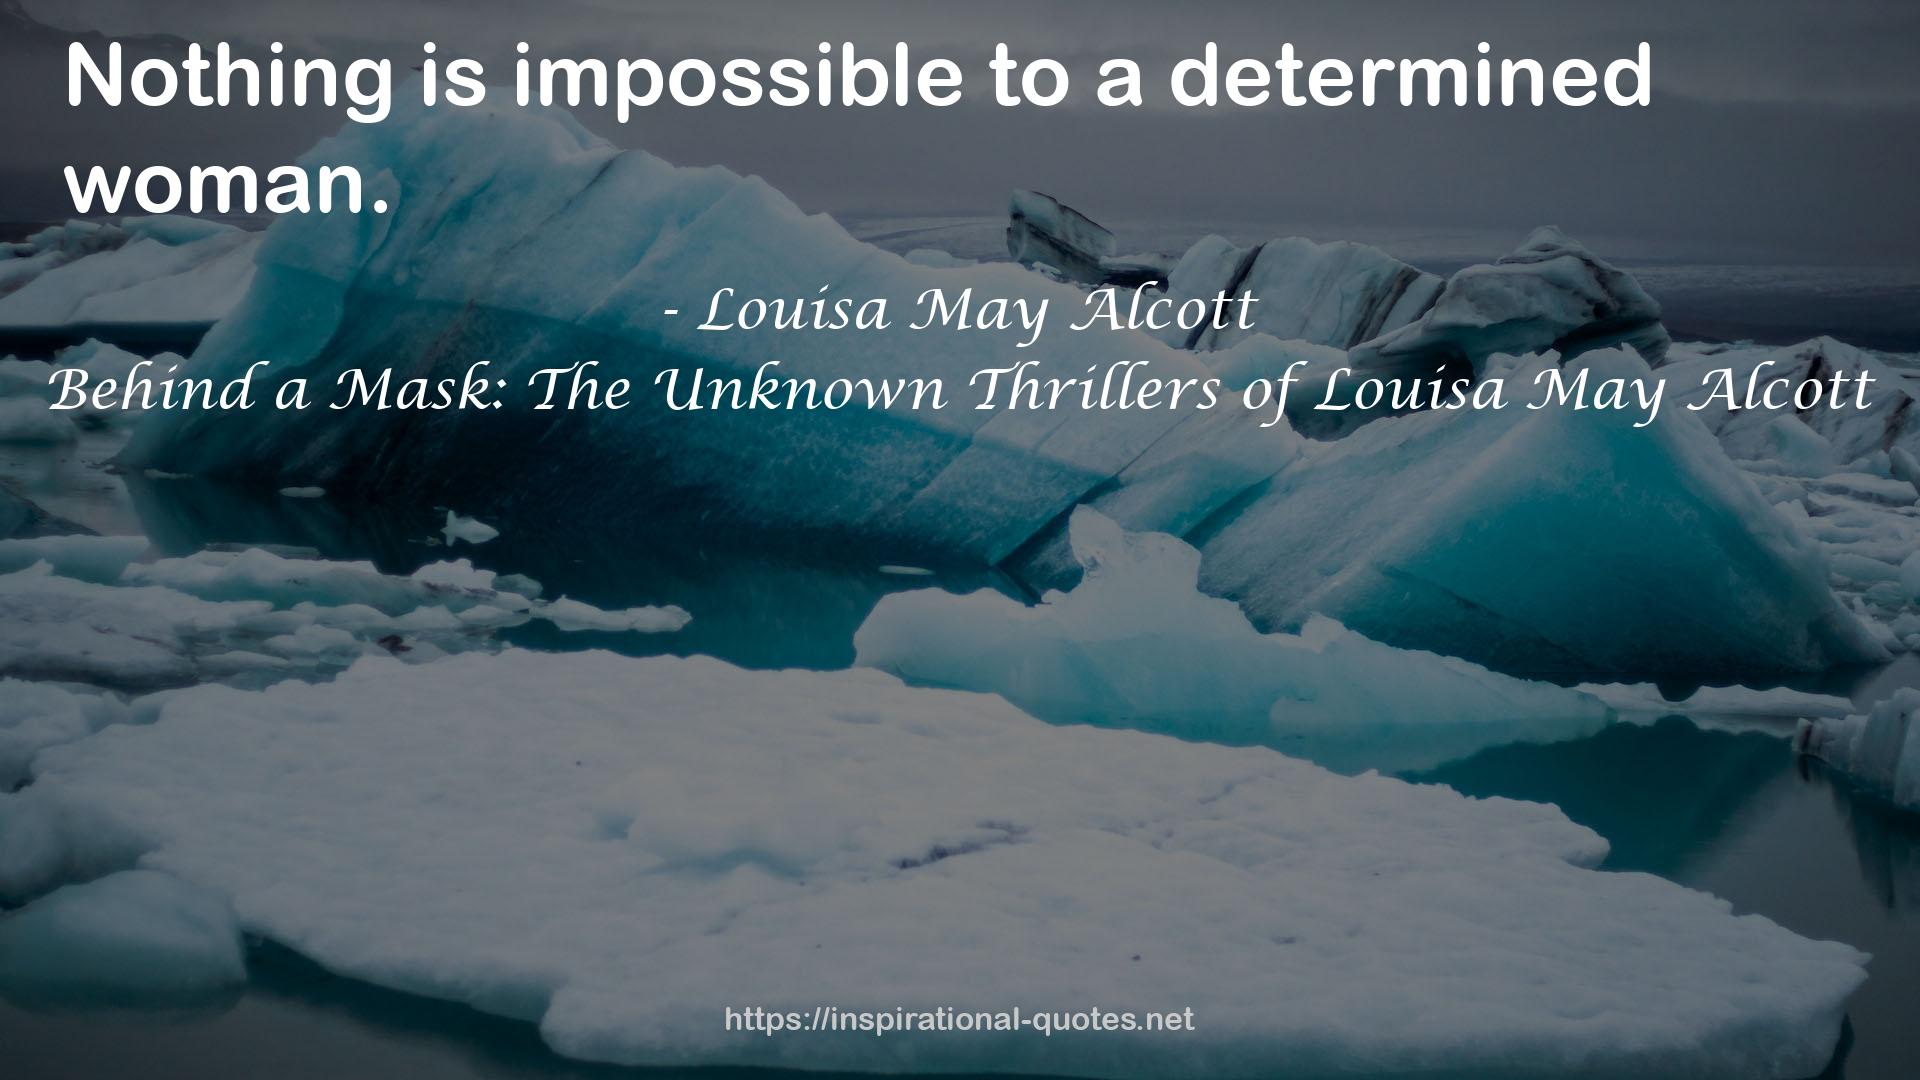 Behind a Mask: The Unknown Thrillers of Louisa May Alcott QUOTES